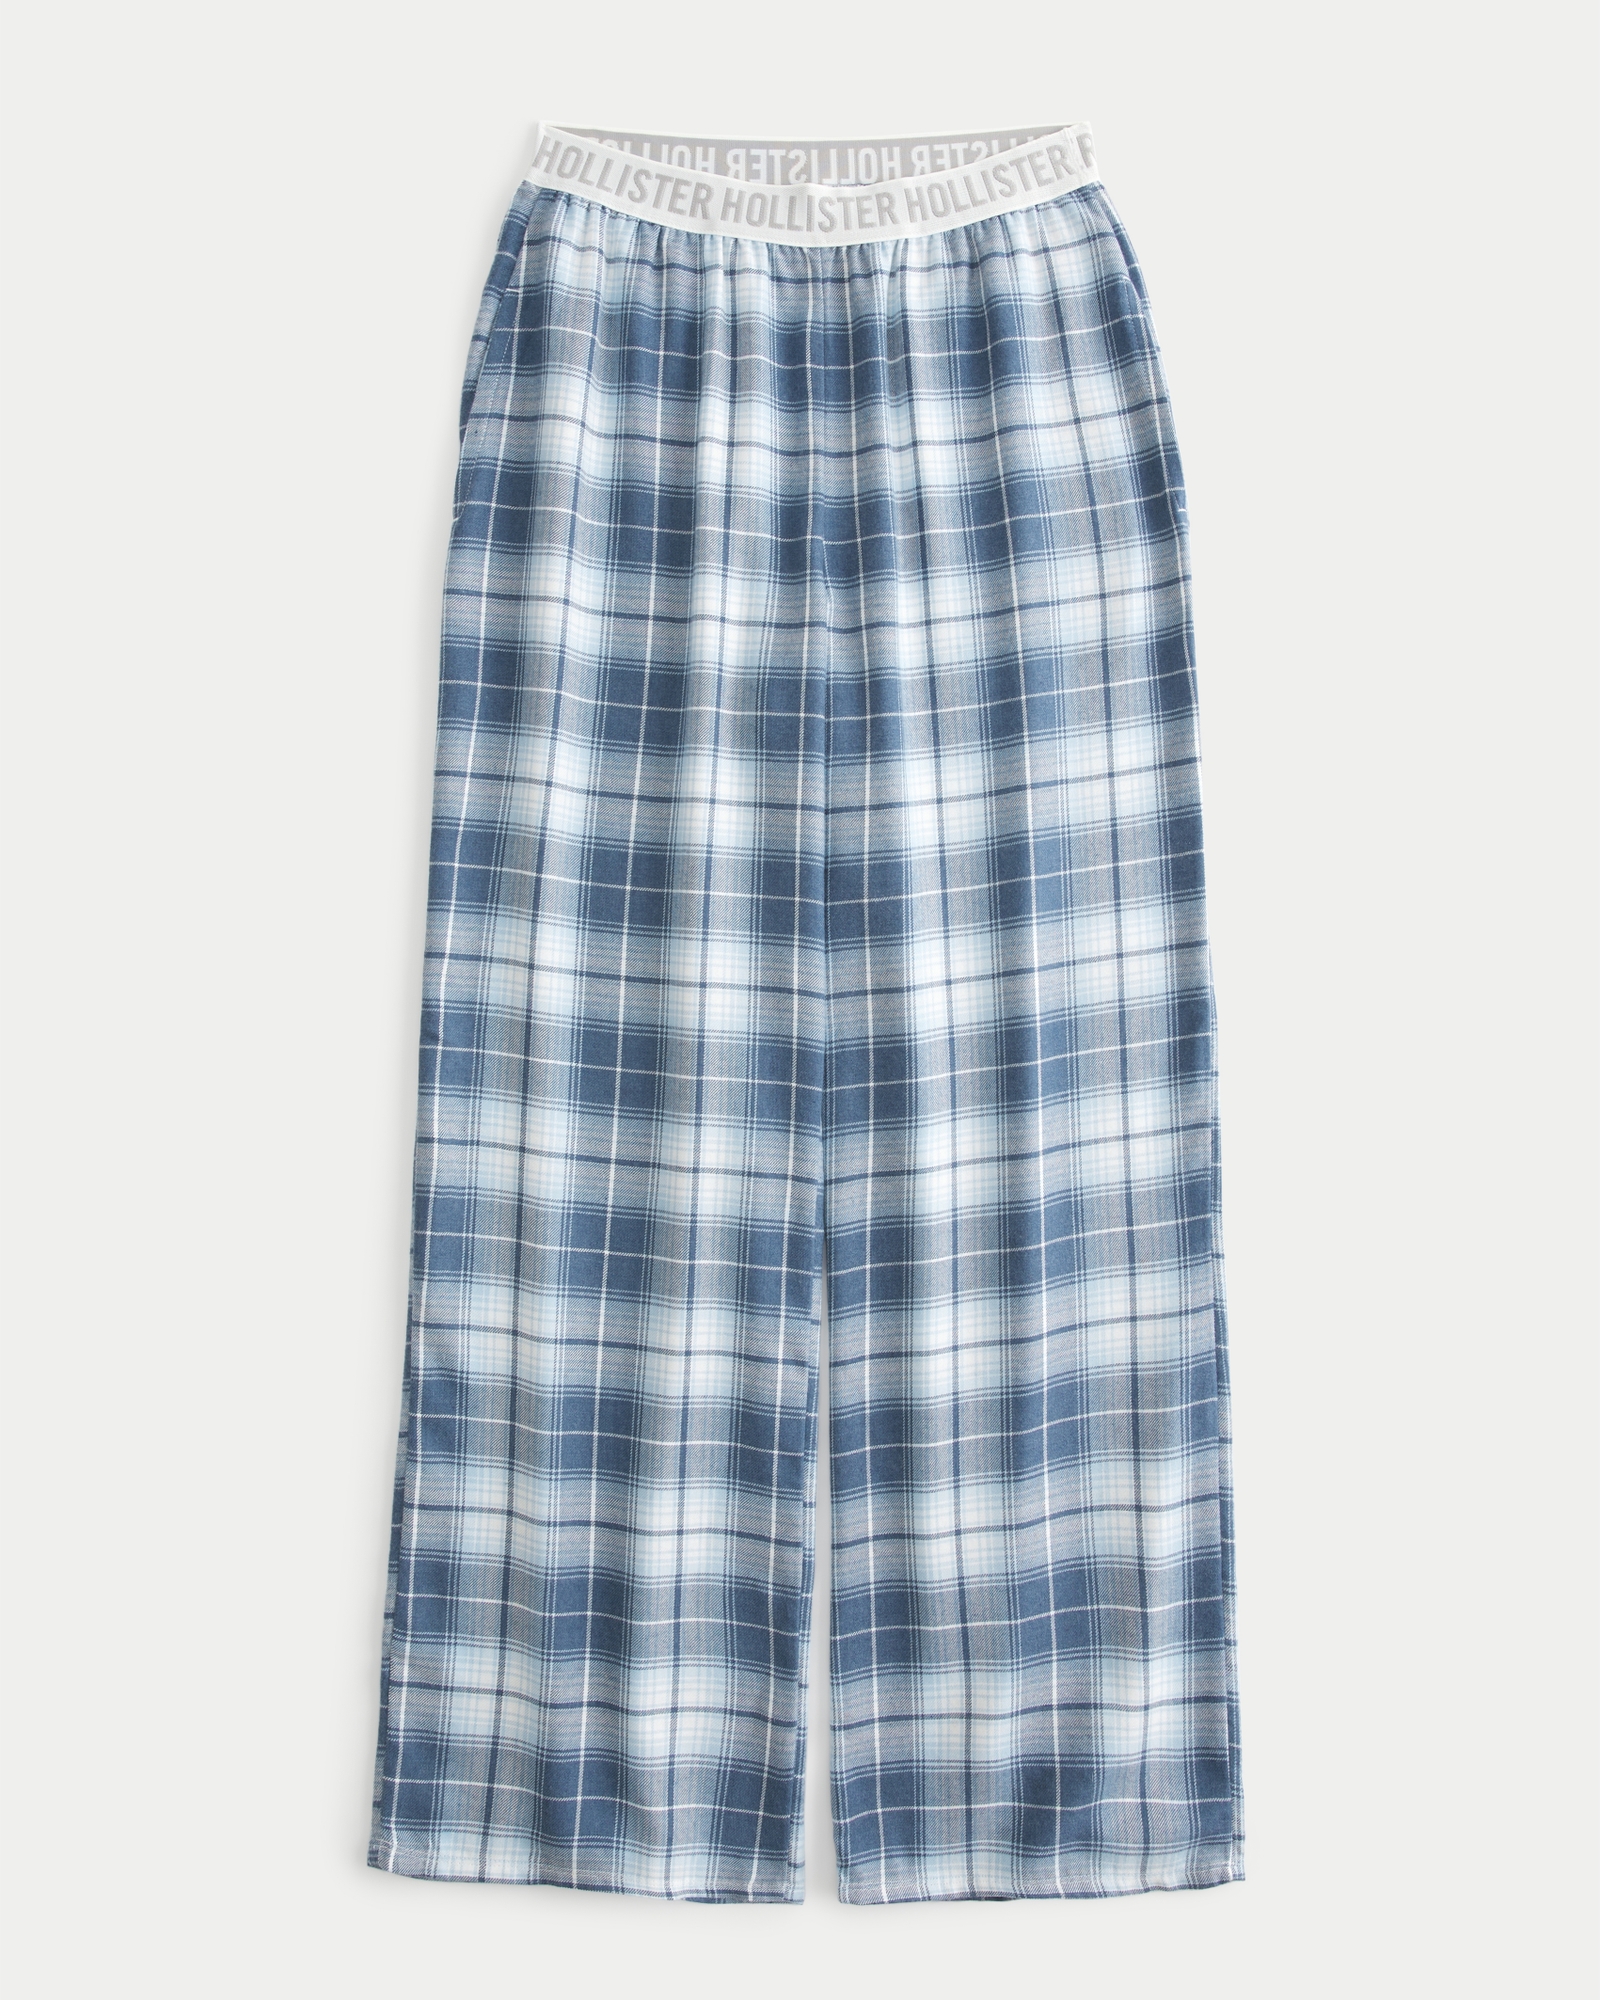 Hollister high rise flare trouser in blue plaid